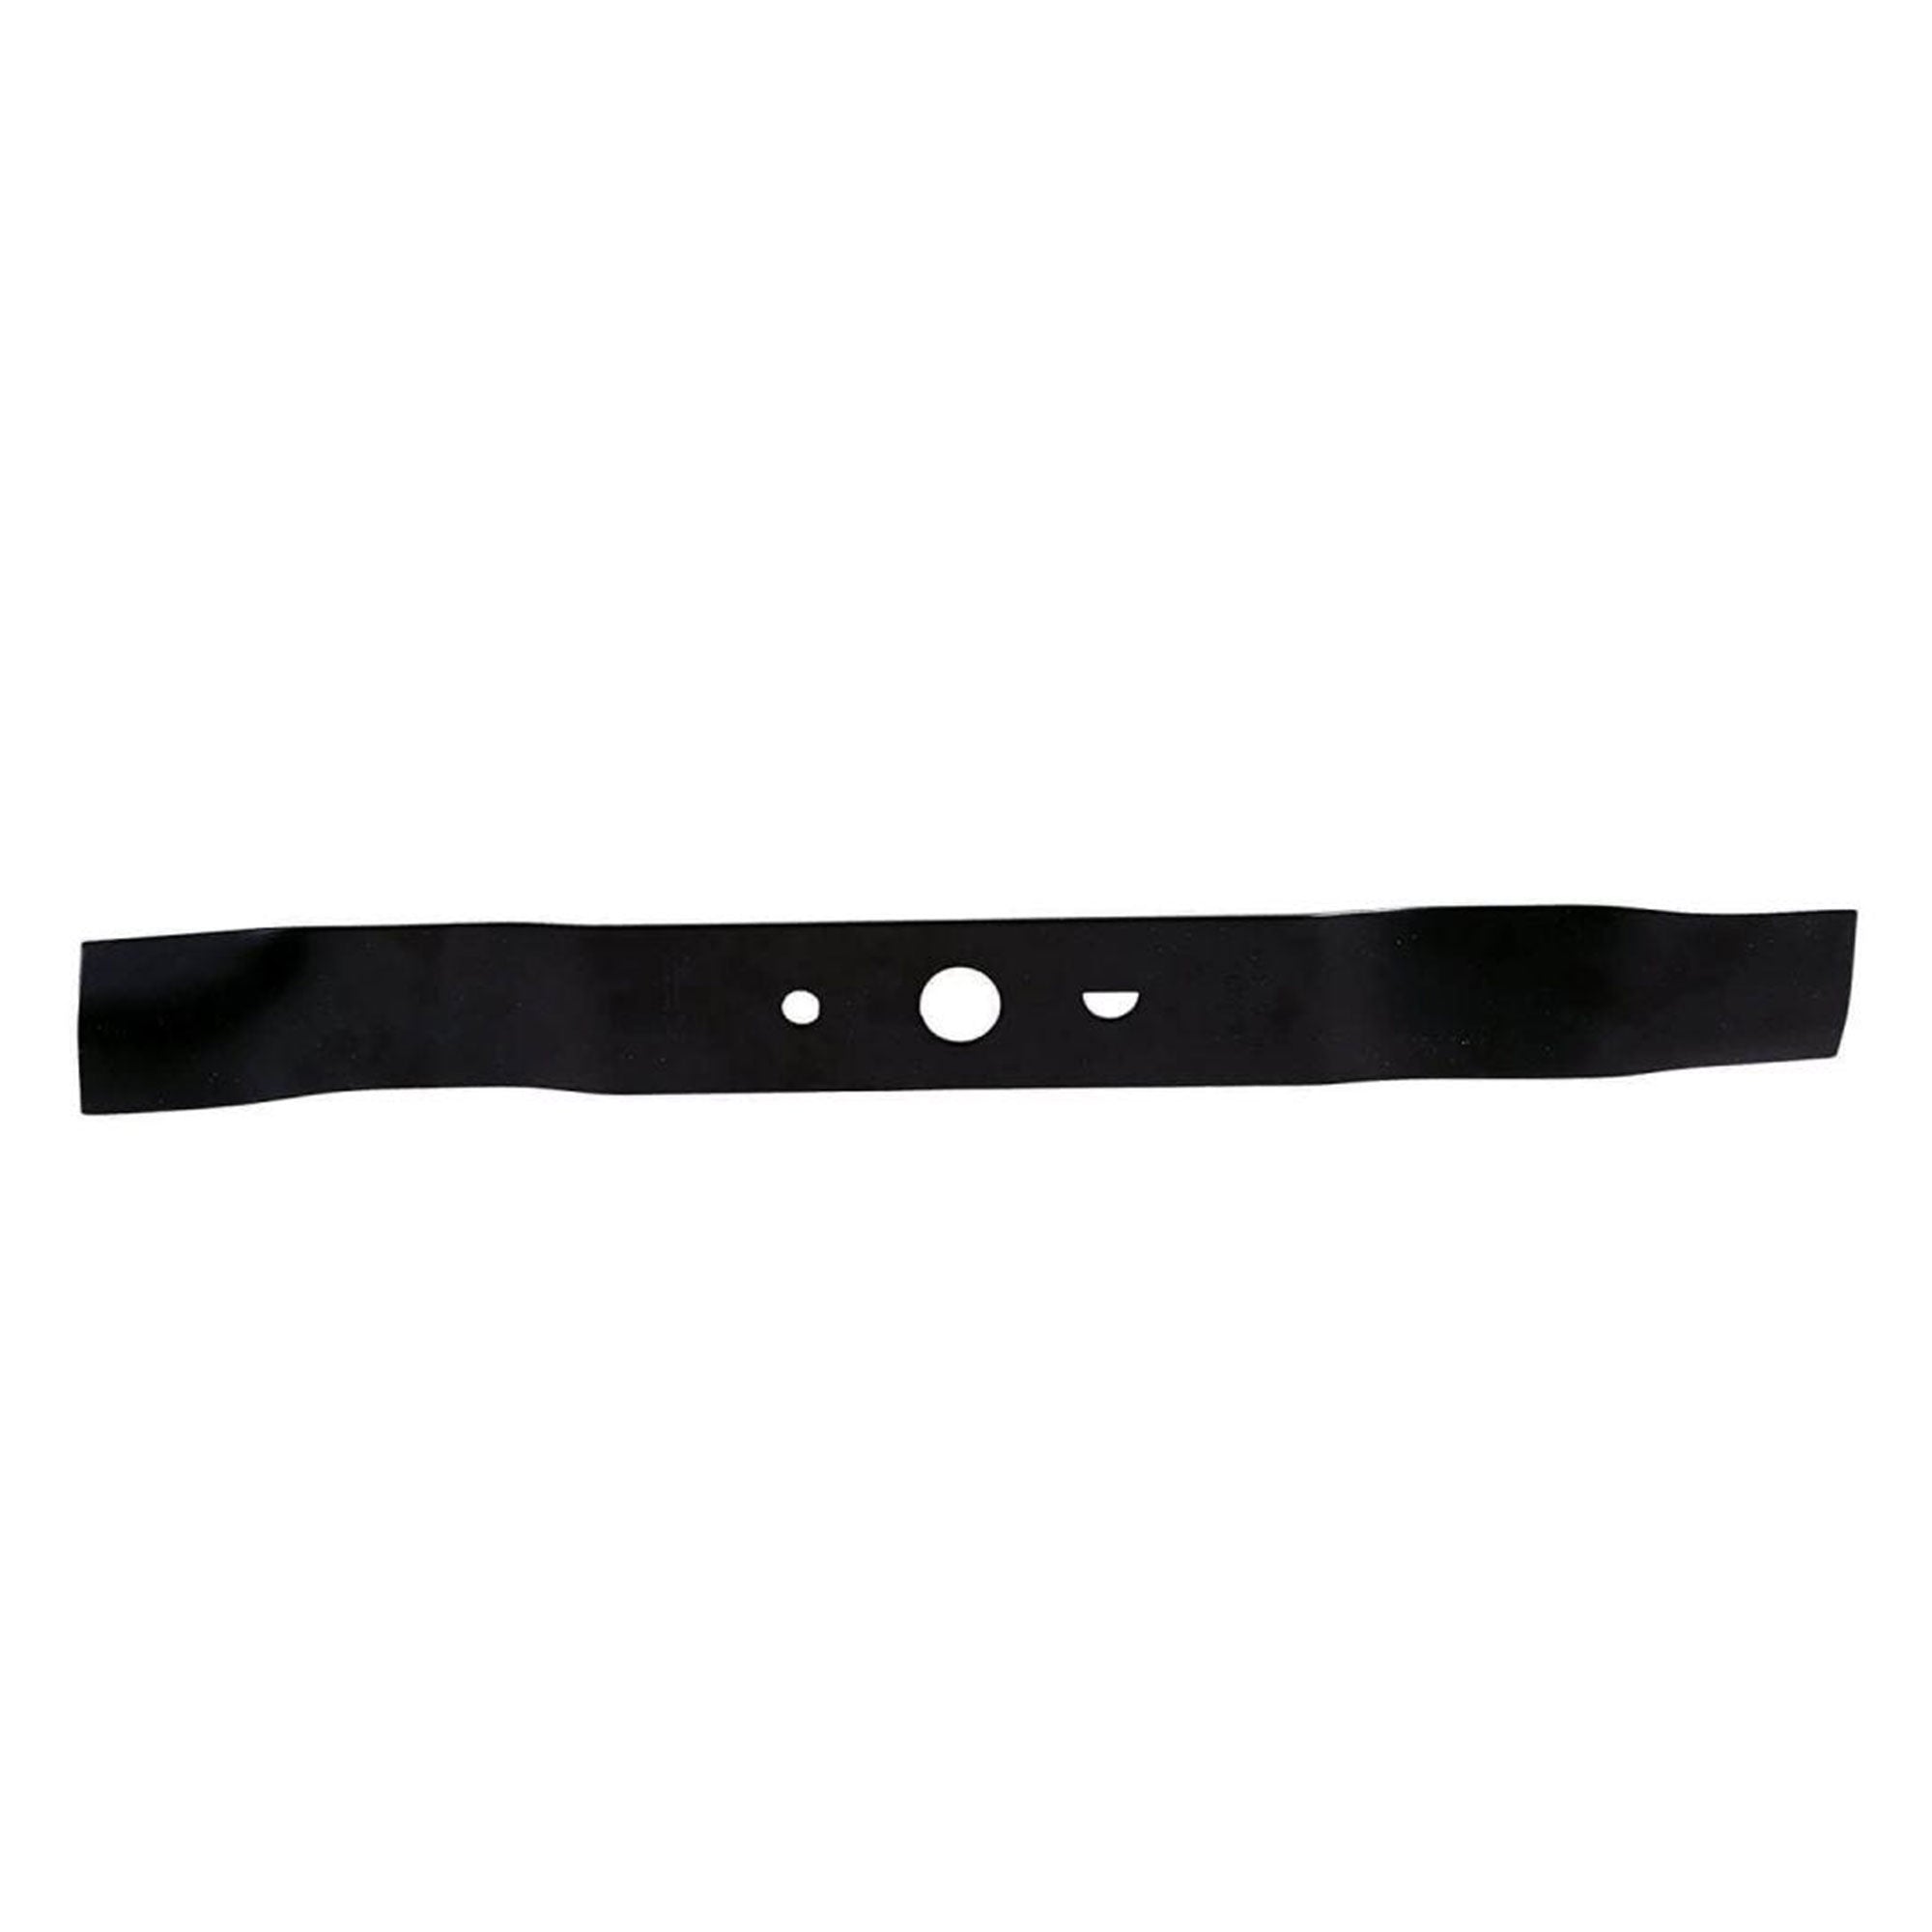 Replacement Blade for 21" Corded Lawn Mowers